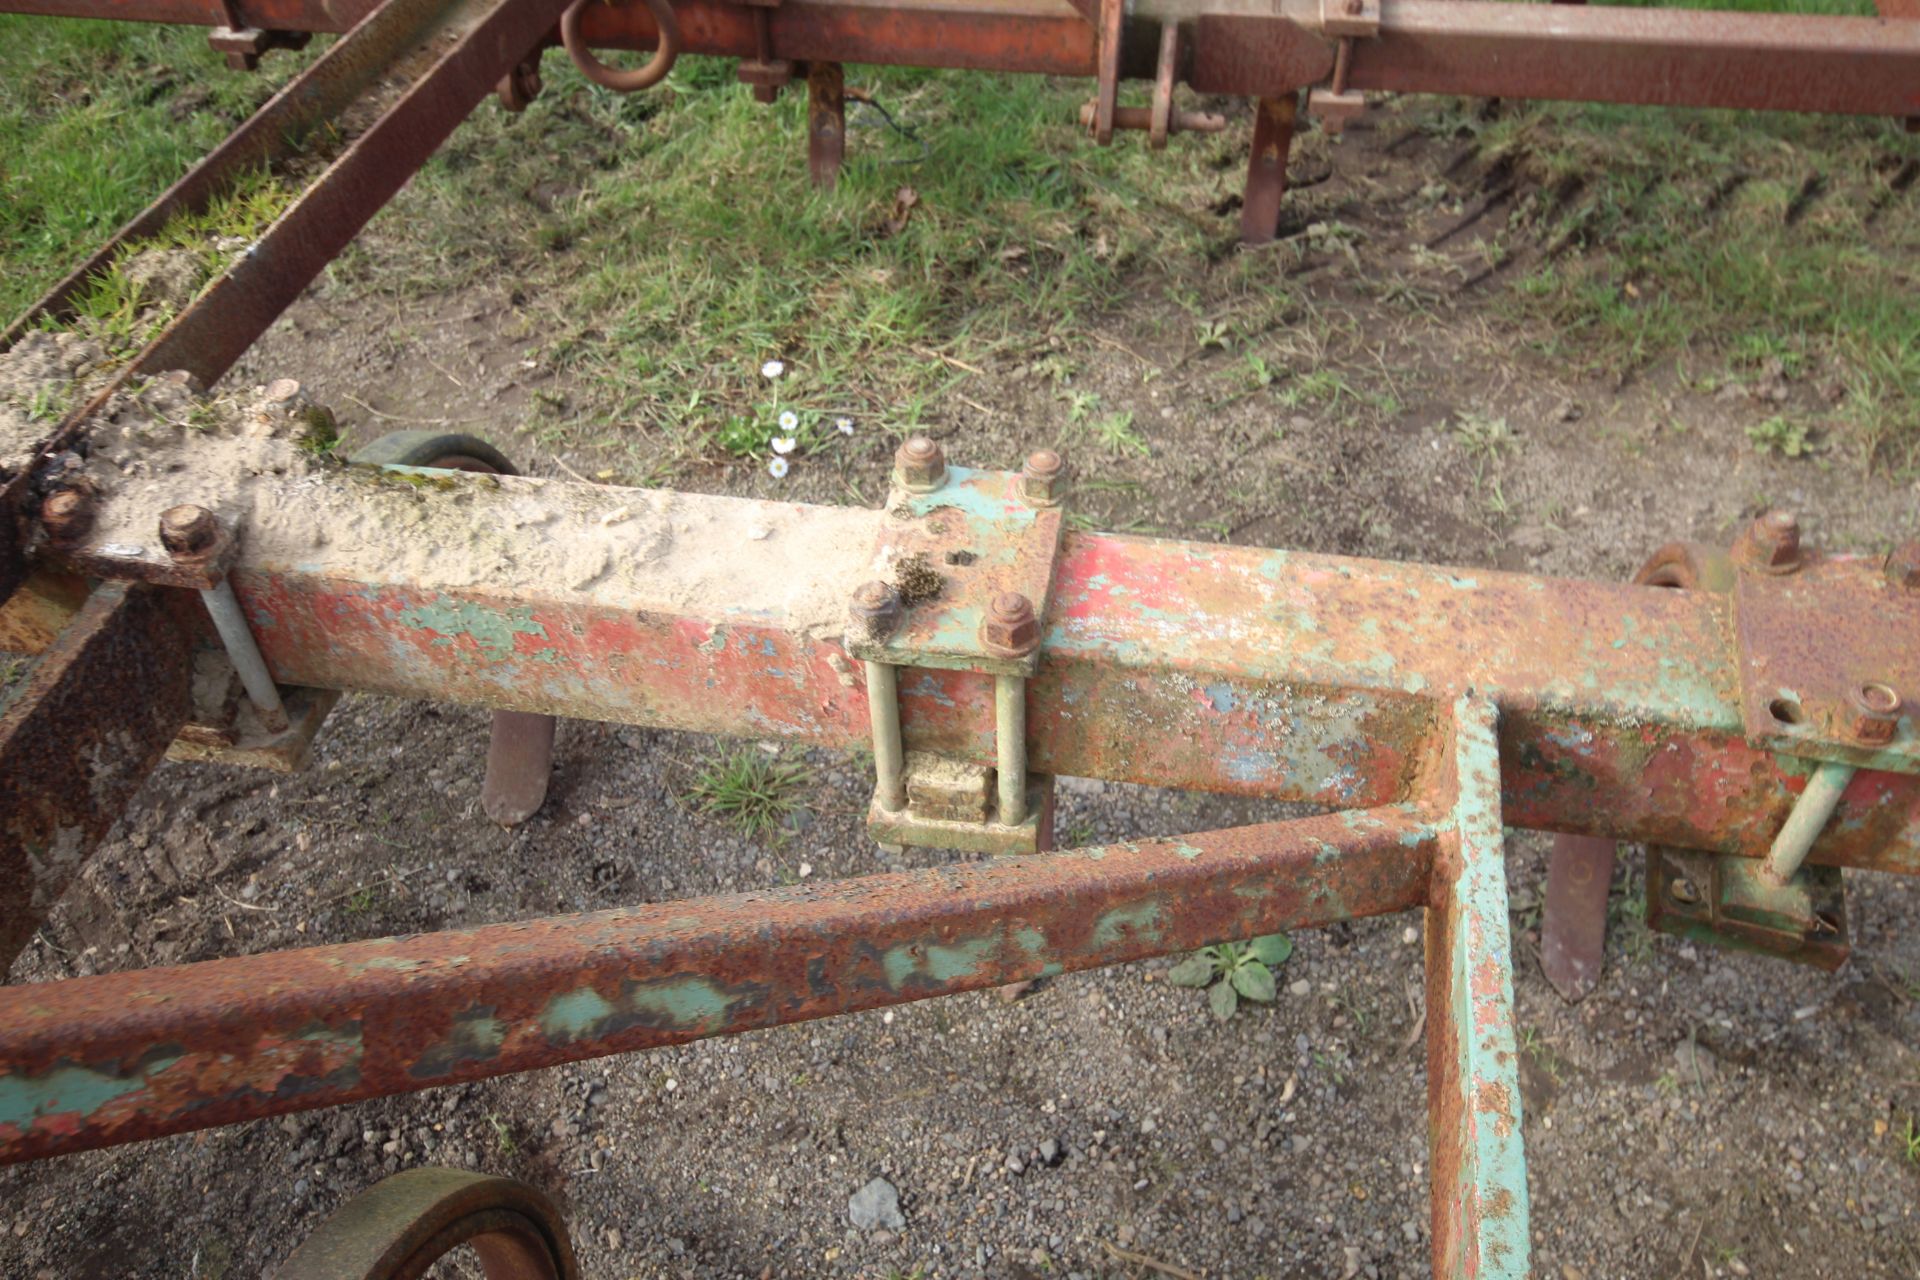 4m sprung tine cultivator. - Image 4 of 15